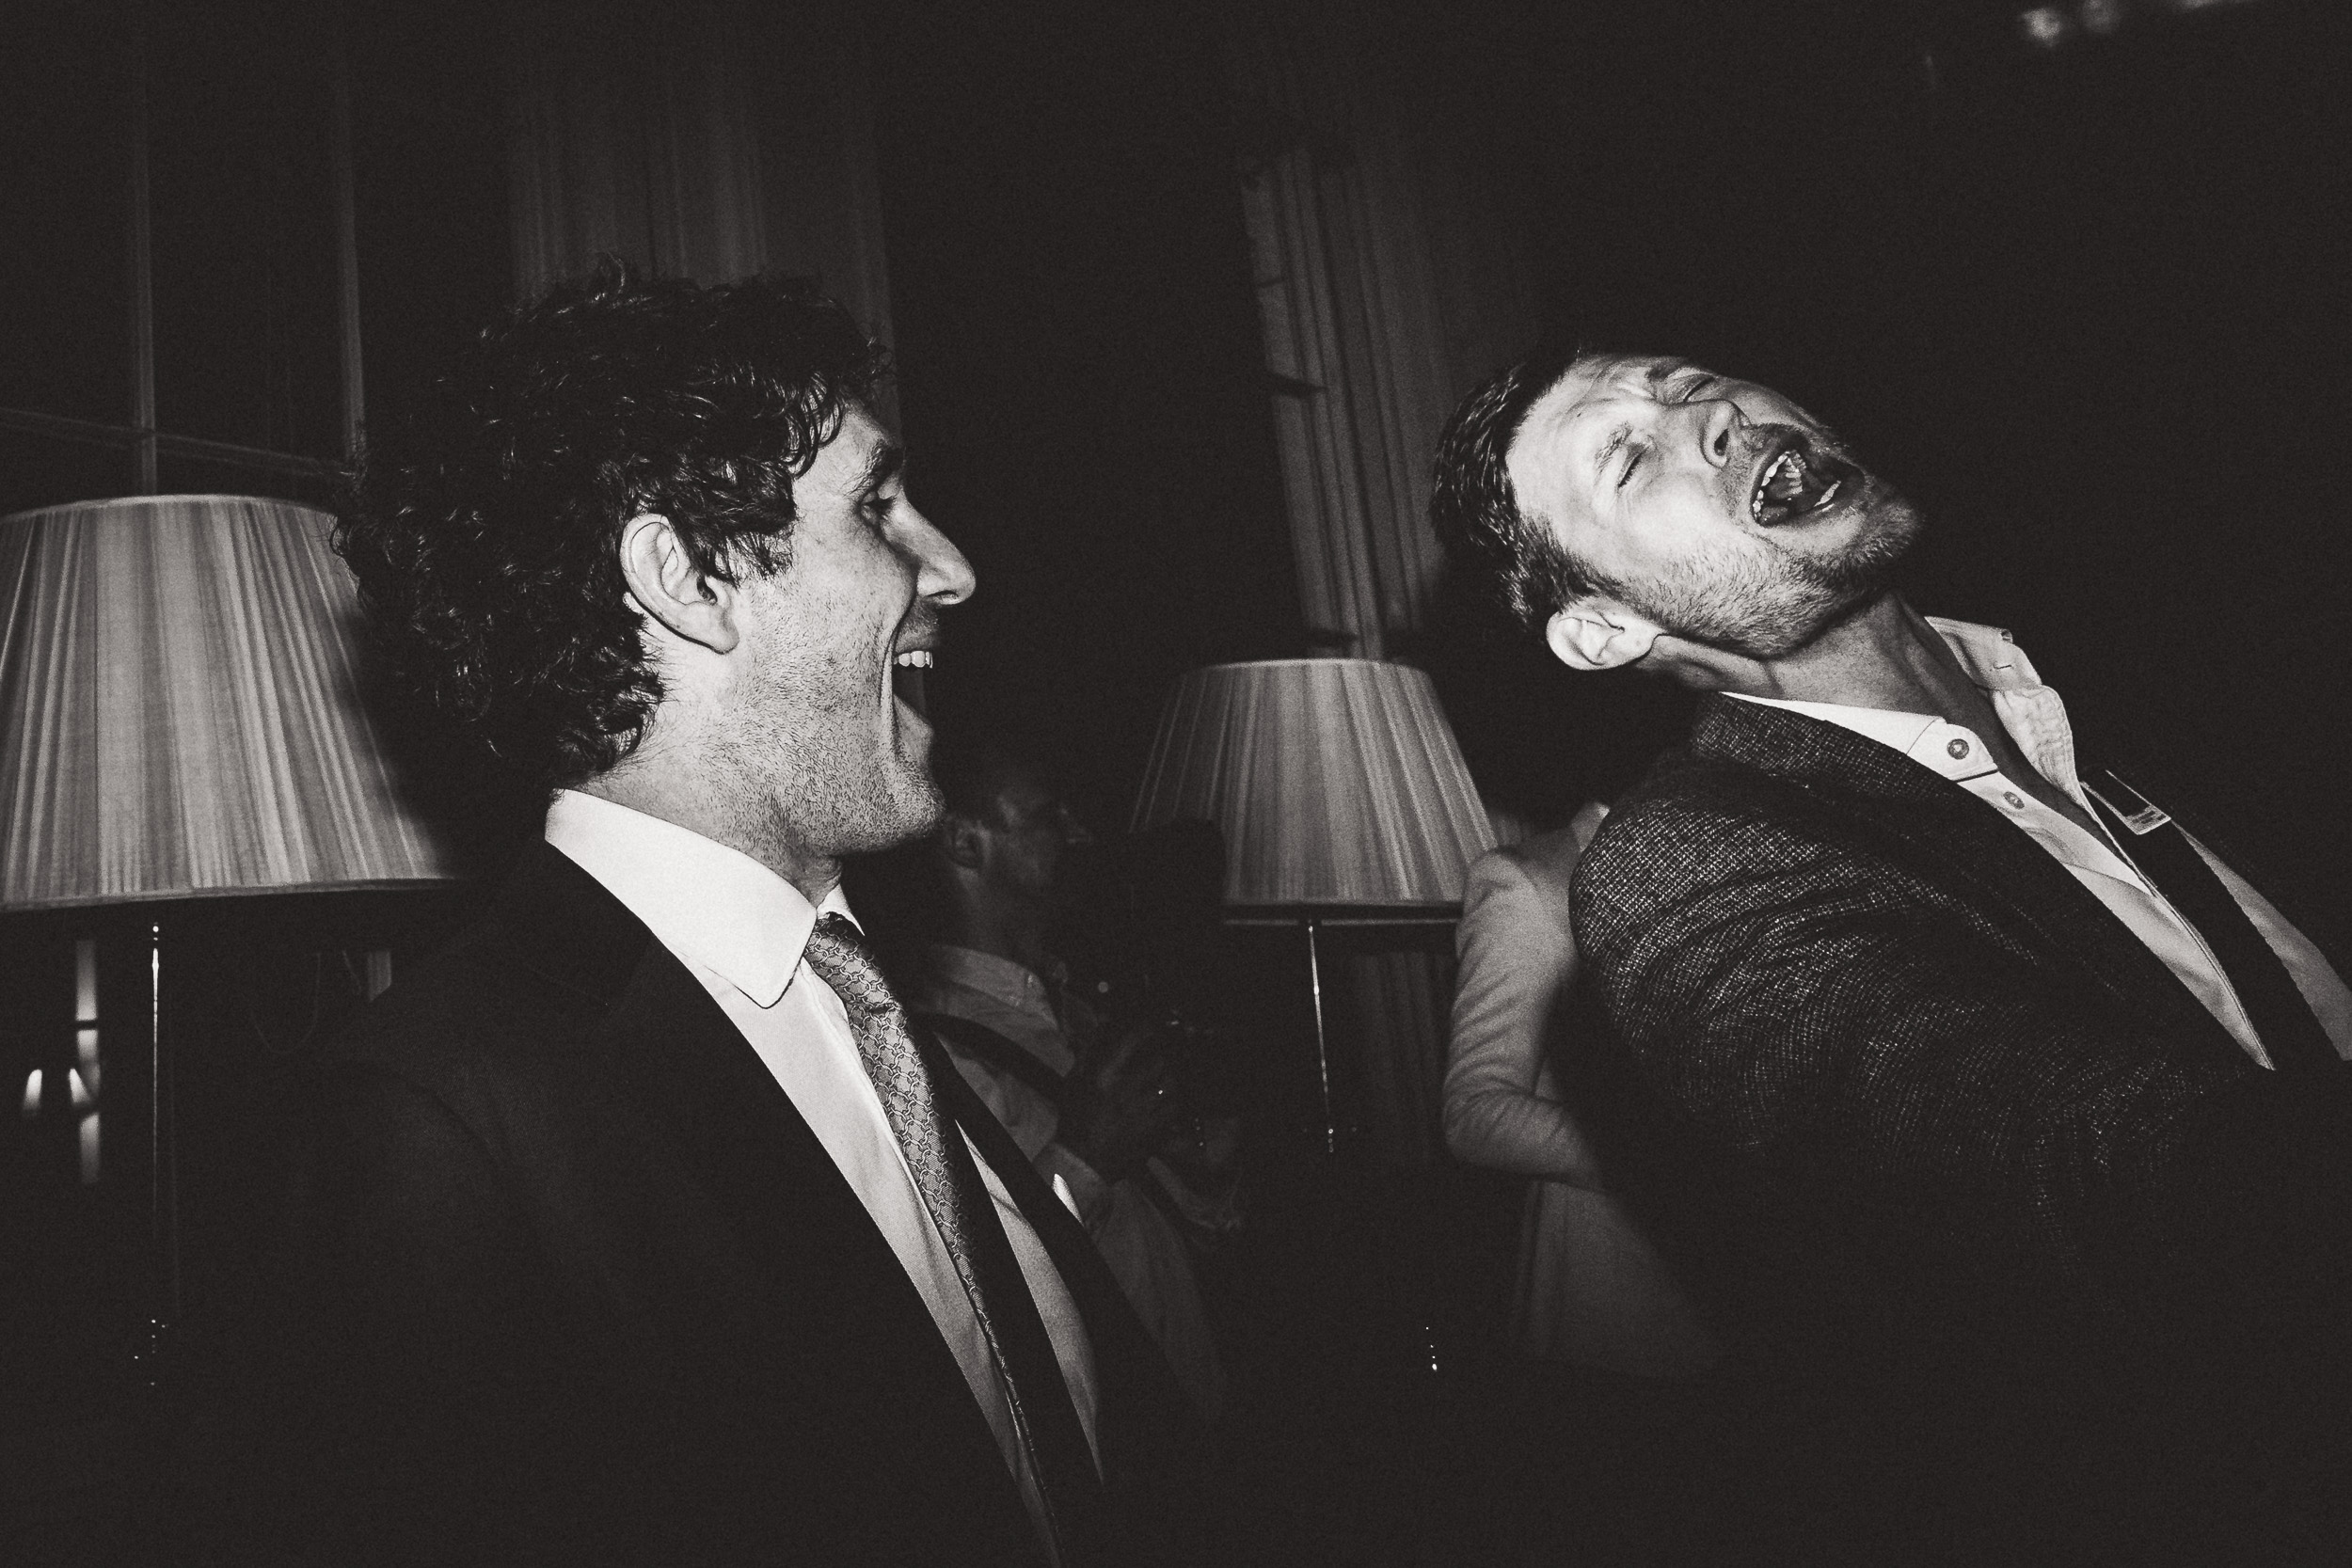 A groom and a wedding photographer capturing humorous moments in a dimly lit room.